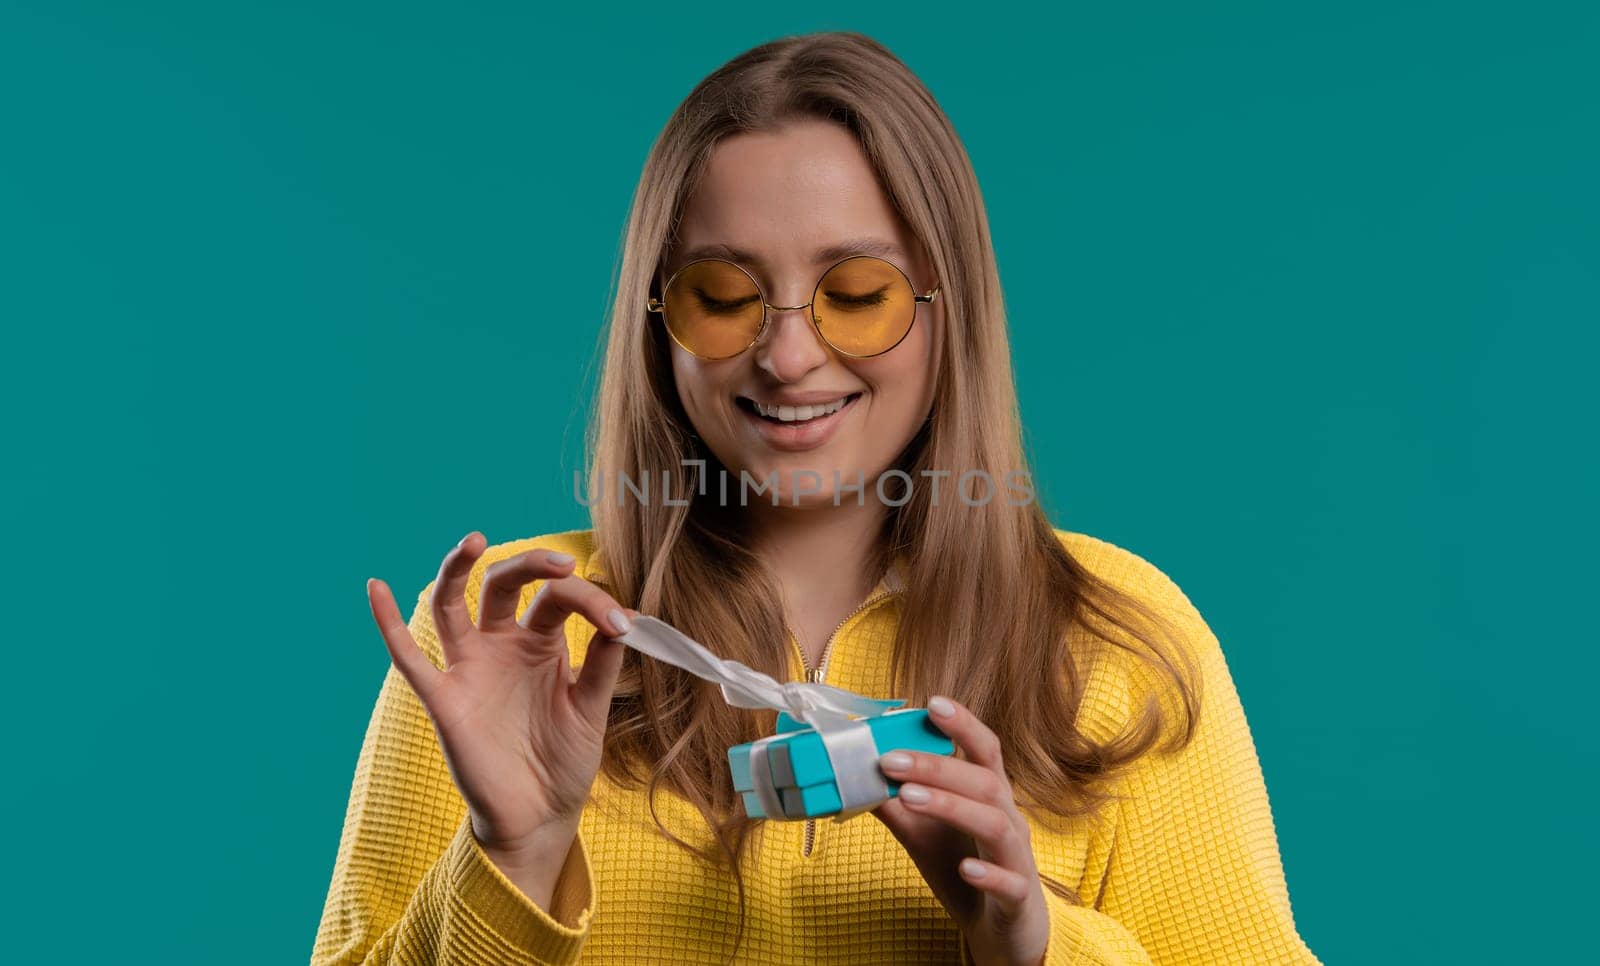 Happy woman gift box on blue background. Girl smiling, interested what's inside. Present, offer surprise for you. High quality photo